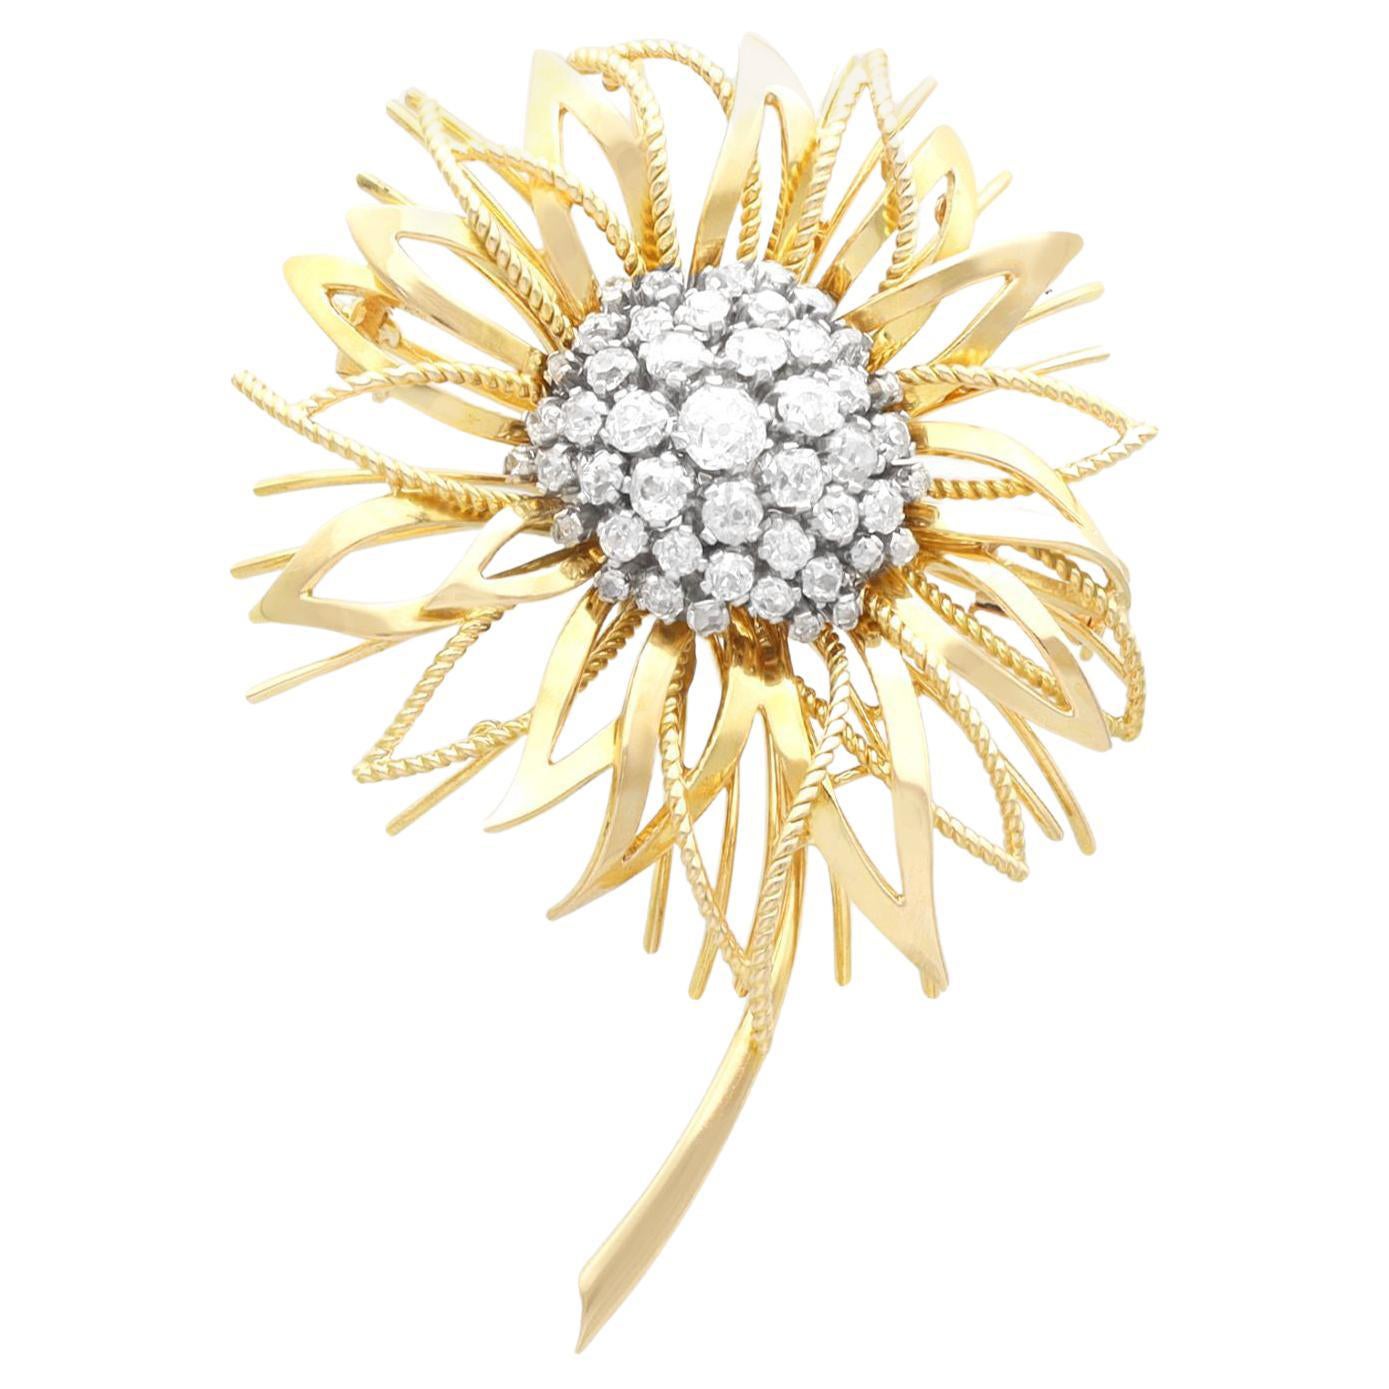 Vintage French 2.89 Carat Diamond and Yellow Gold Flower Brooch, circa 1950